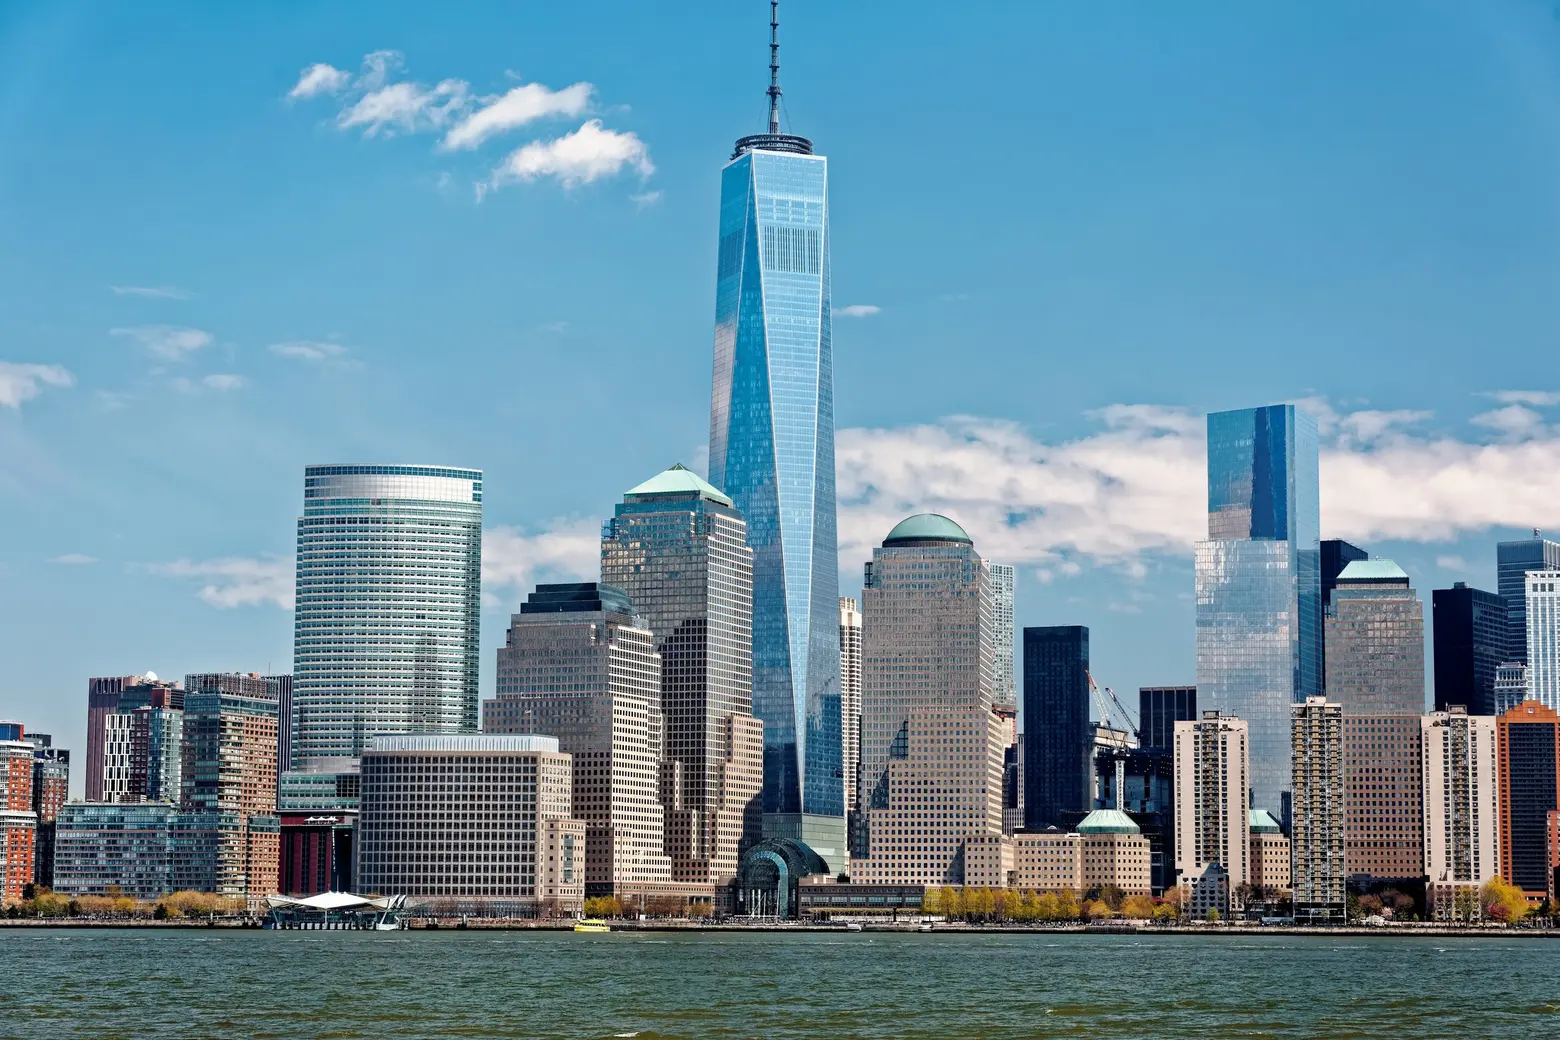 NYC has the world’s second highest concentration of tall towers